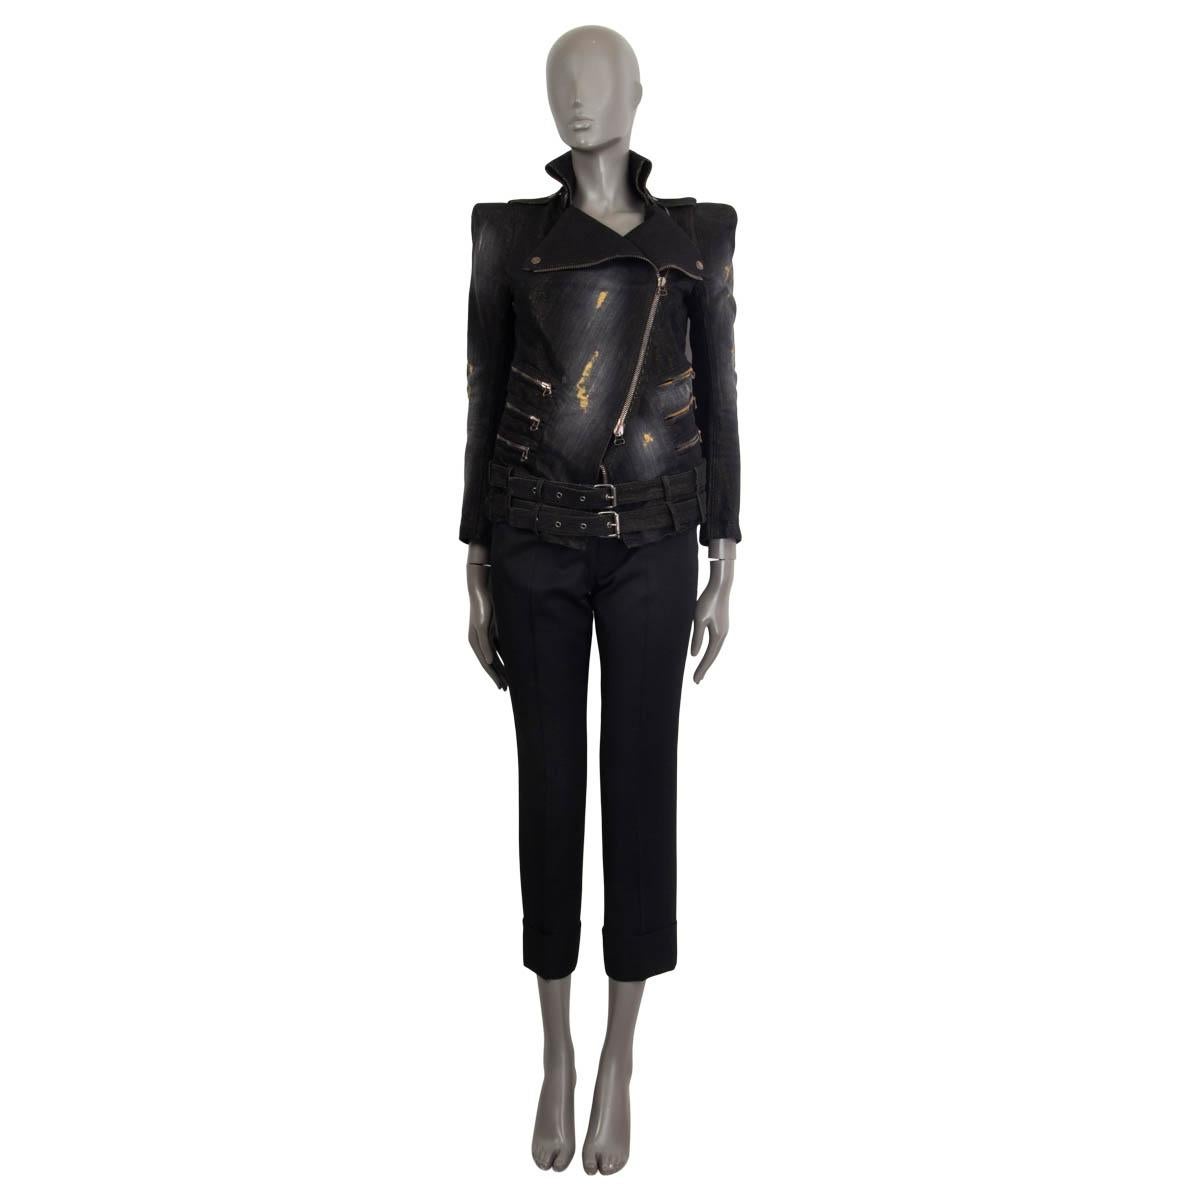 100% authentic Balmain longsleeve distressed biker jacket in black and gold cotton (65%), rayon (23%) and  polyester (12%). Embellished with gold lurex threads all over the jacket and shoulder epualettes. Comes with six zip pockets on the front and